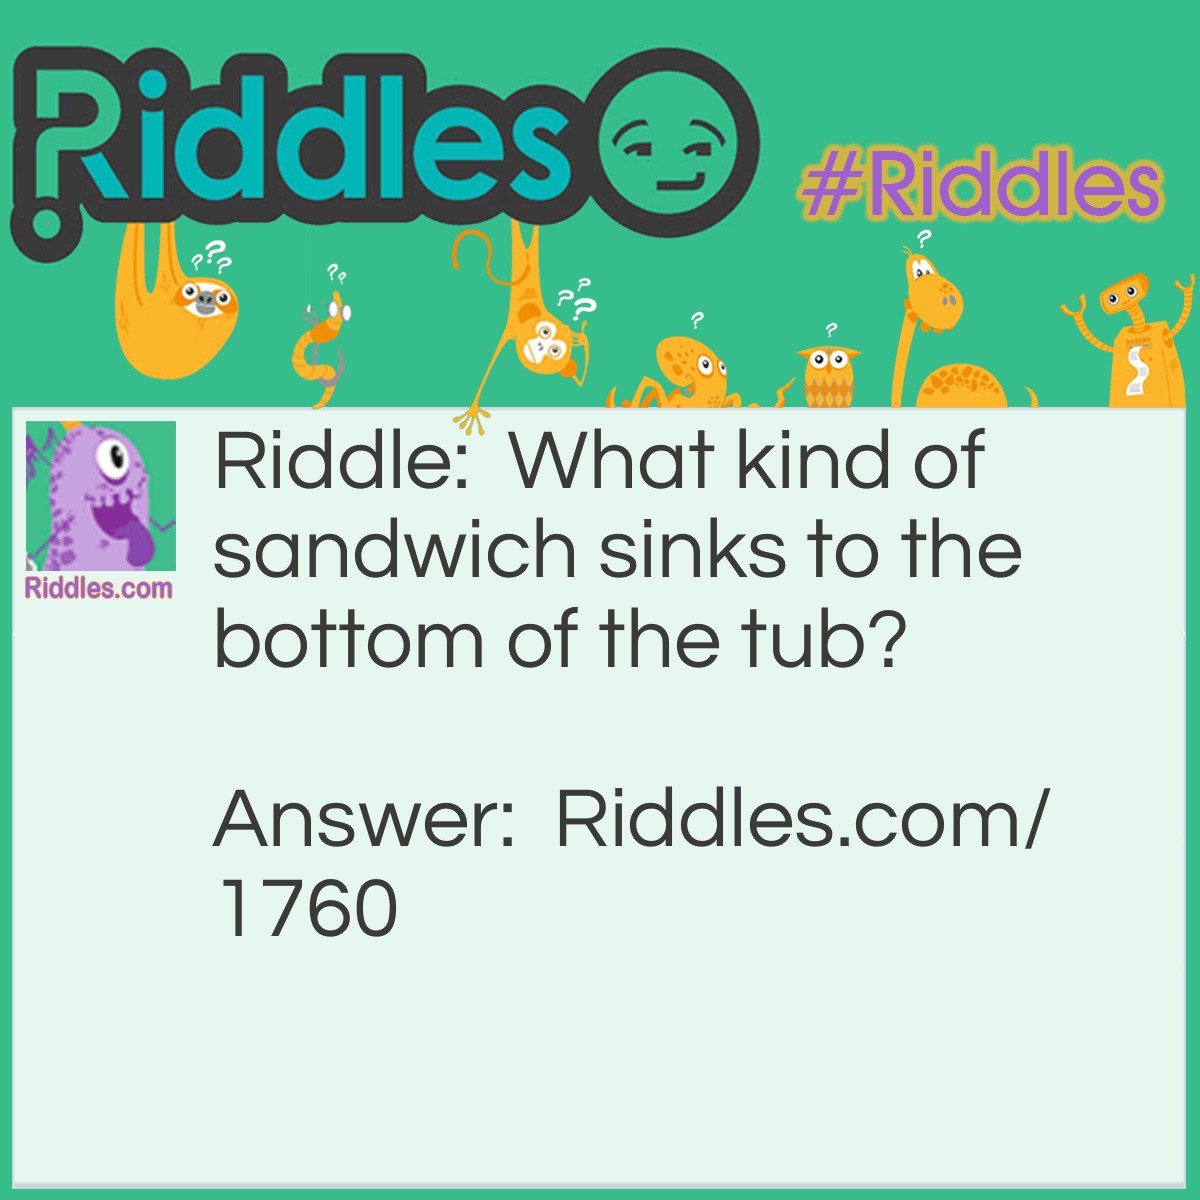 Riddle: What kind of sandwich sinks to the bottom of the tub? Answer: A submarine sandwich!